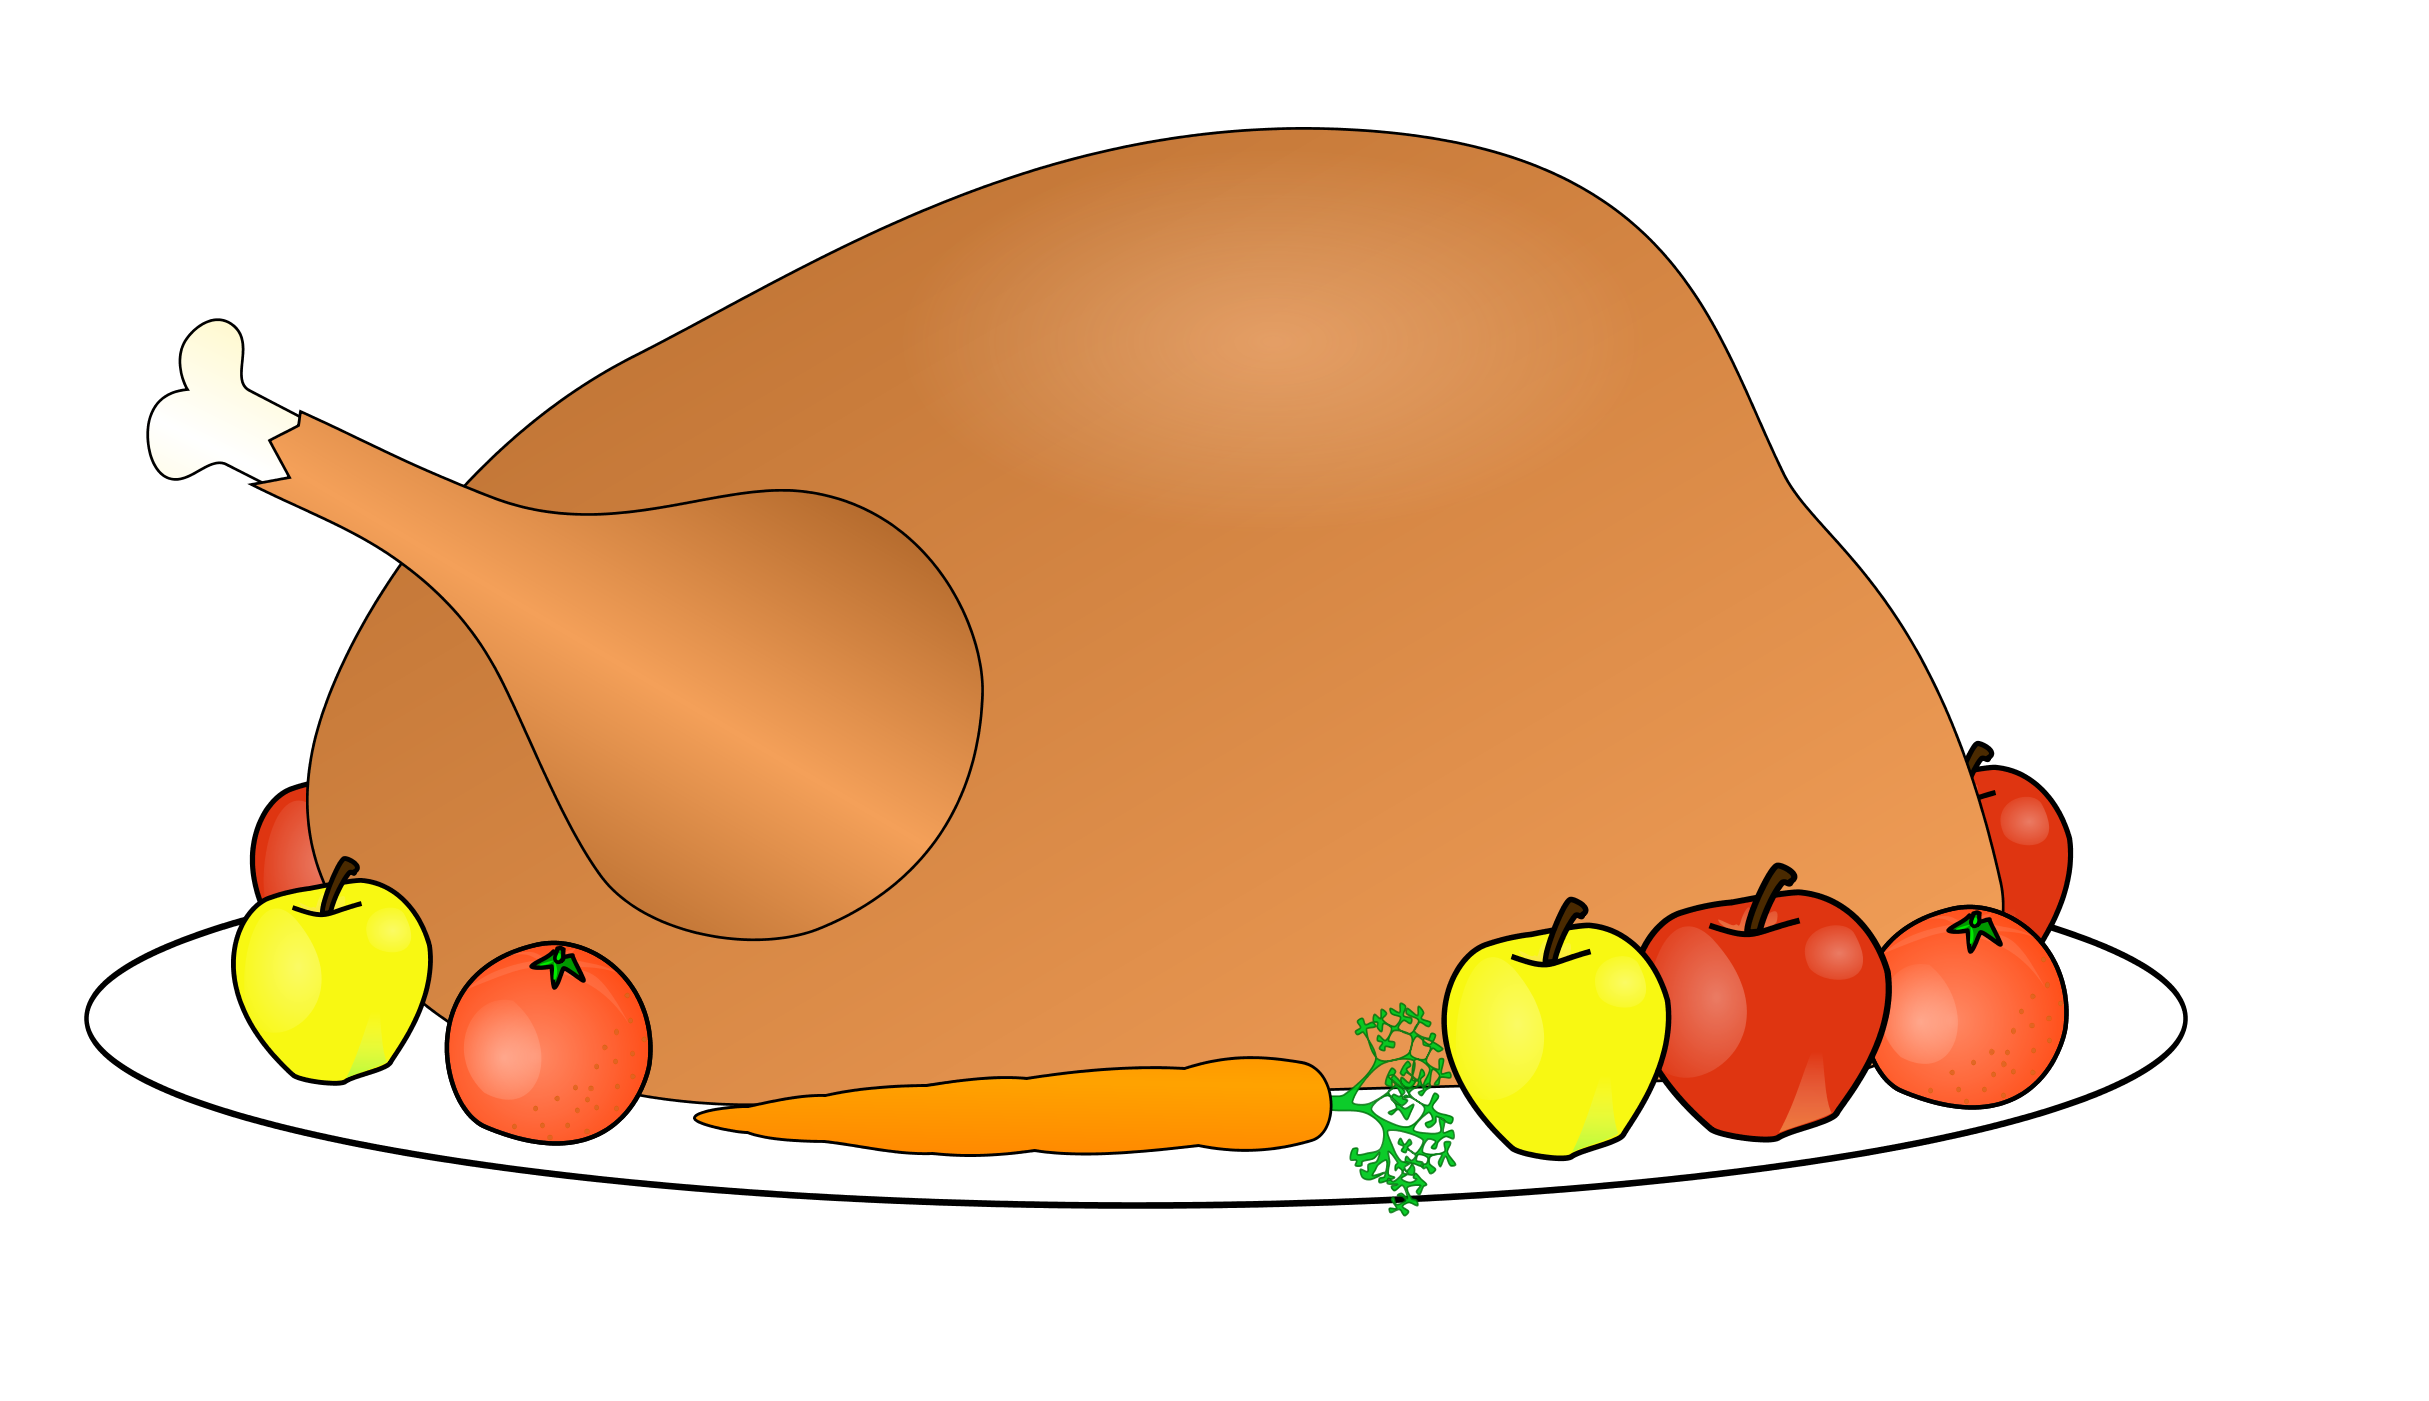 Roasted Turkey Clipart - ClipArt Best